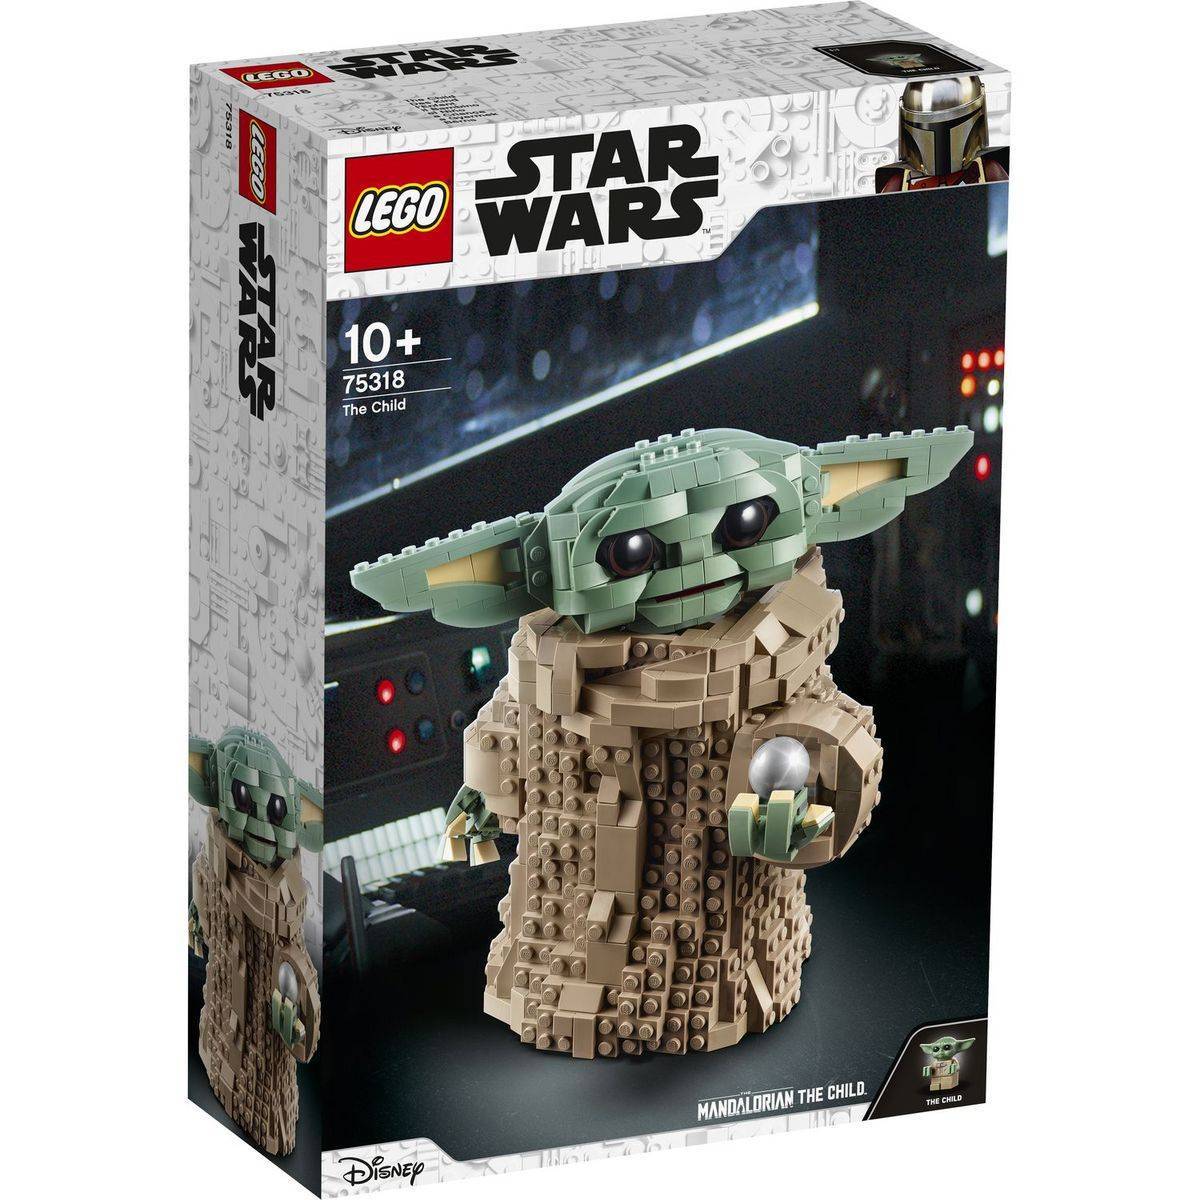 Achat Calendrier LEGO personnage Star Wars pas cher - Neuf et